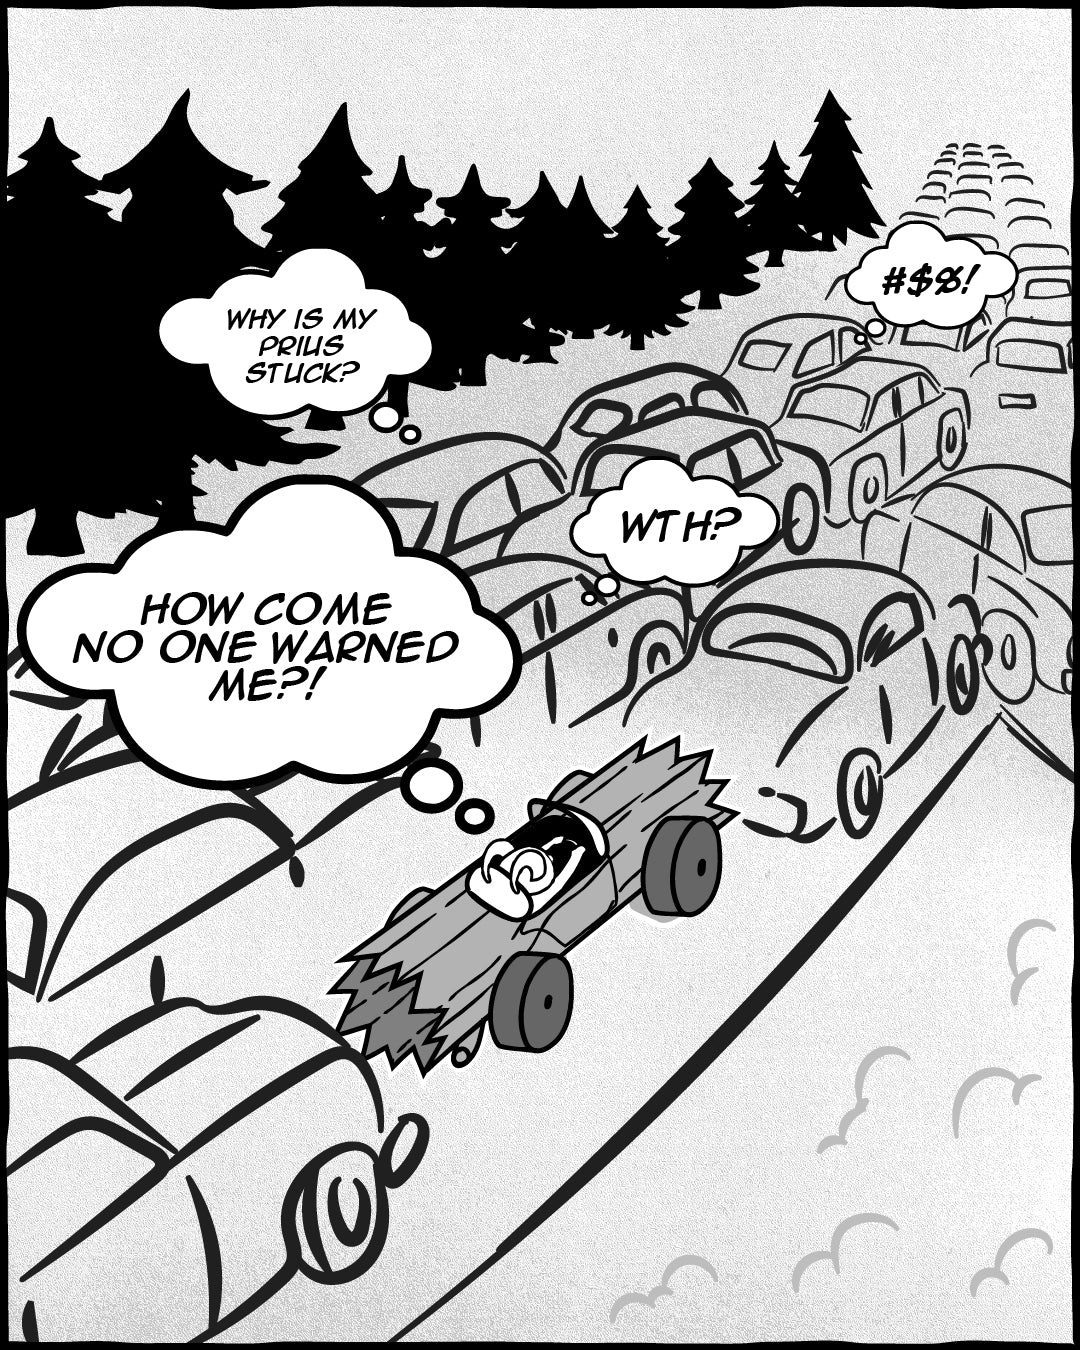 Traffic - No Chains, Snow Problem, The Adventures Of Lambert Comic Series | TRVRS Outdoors